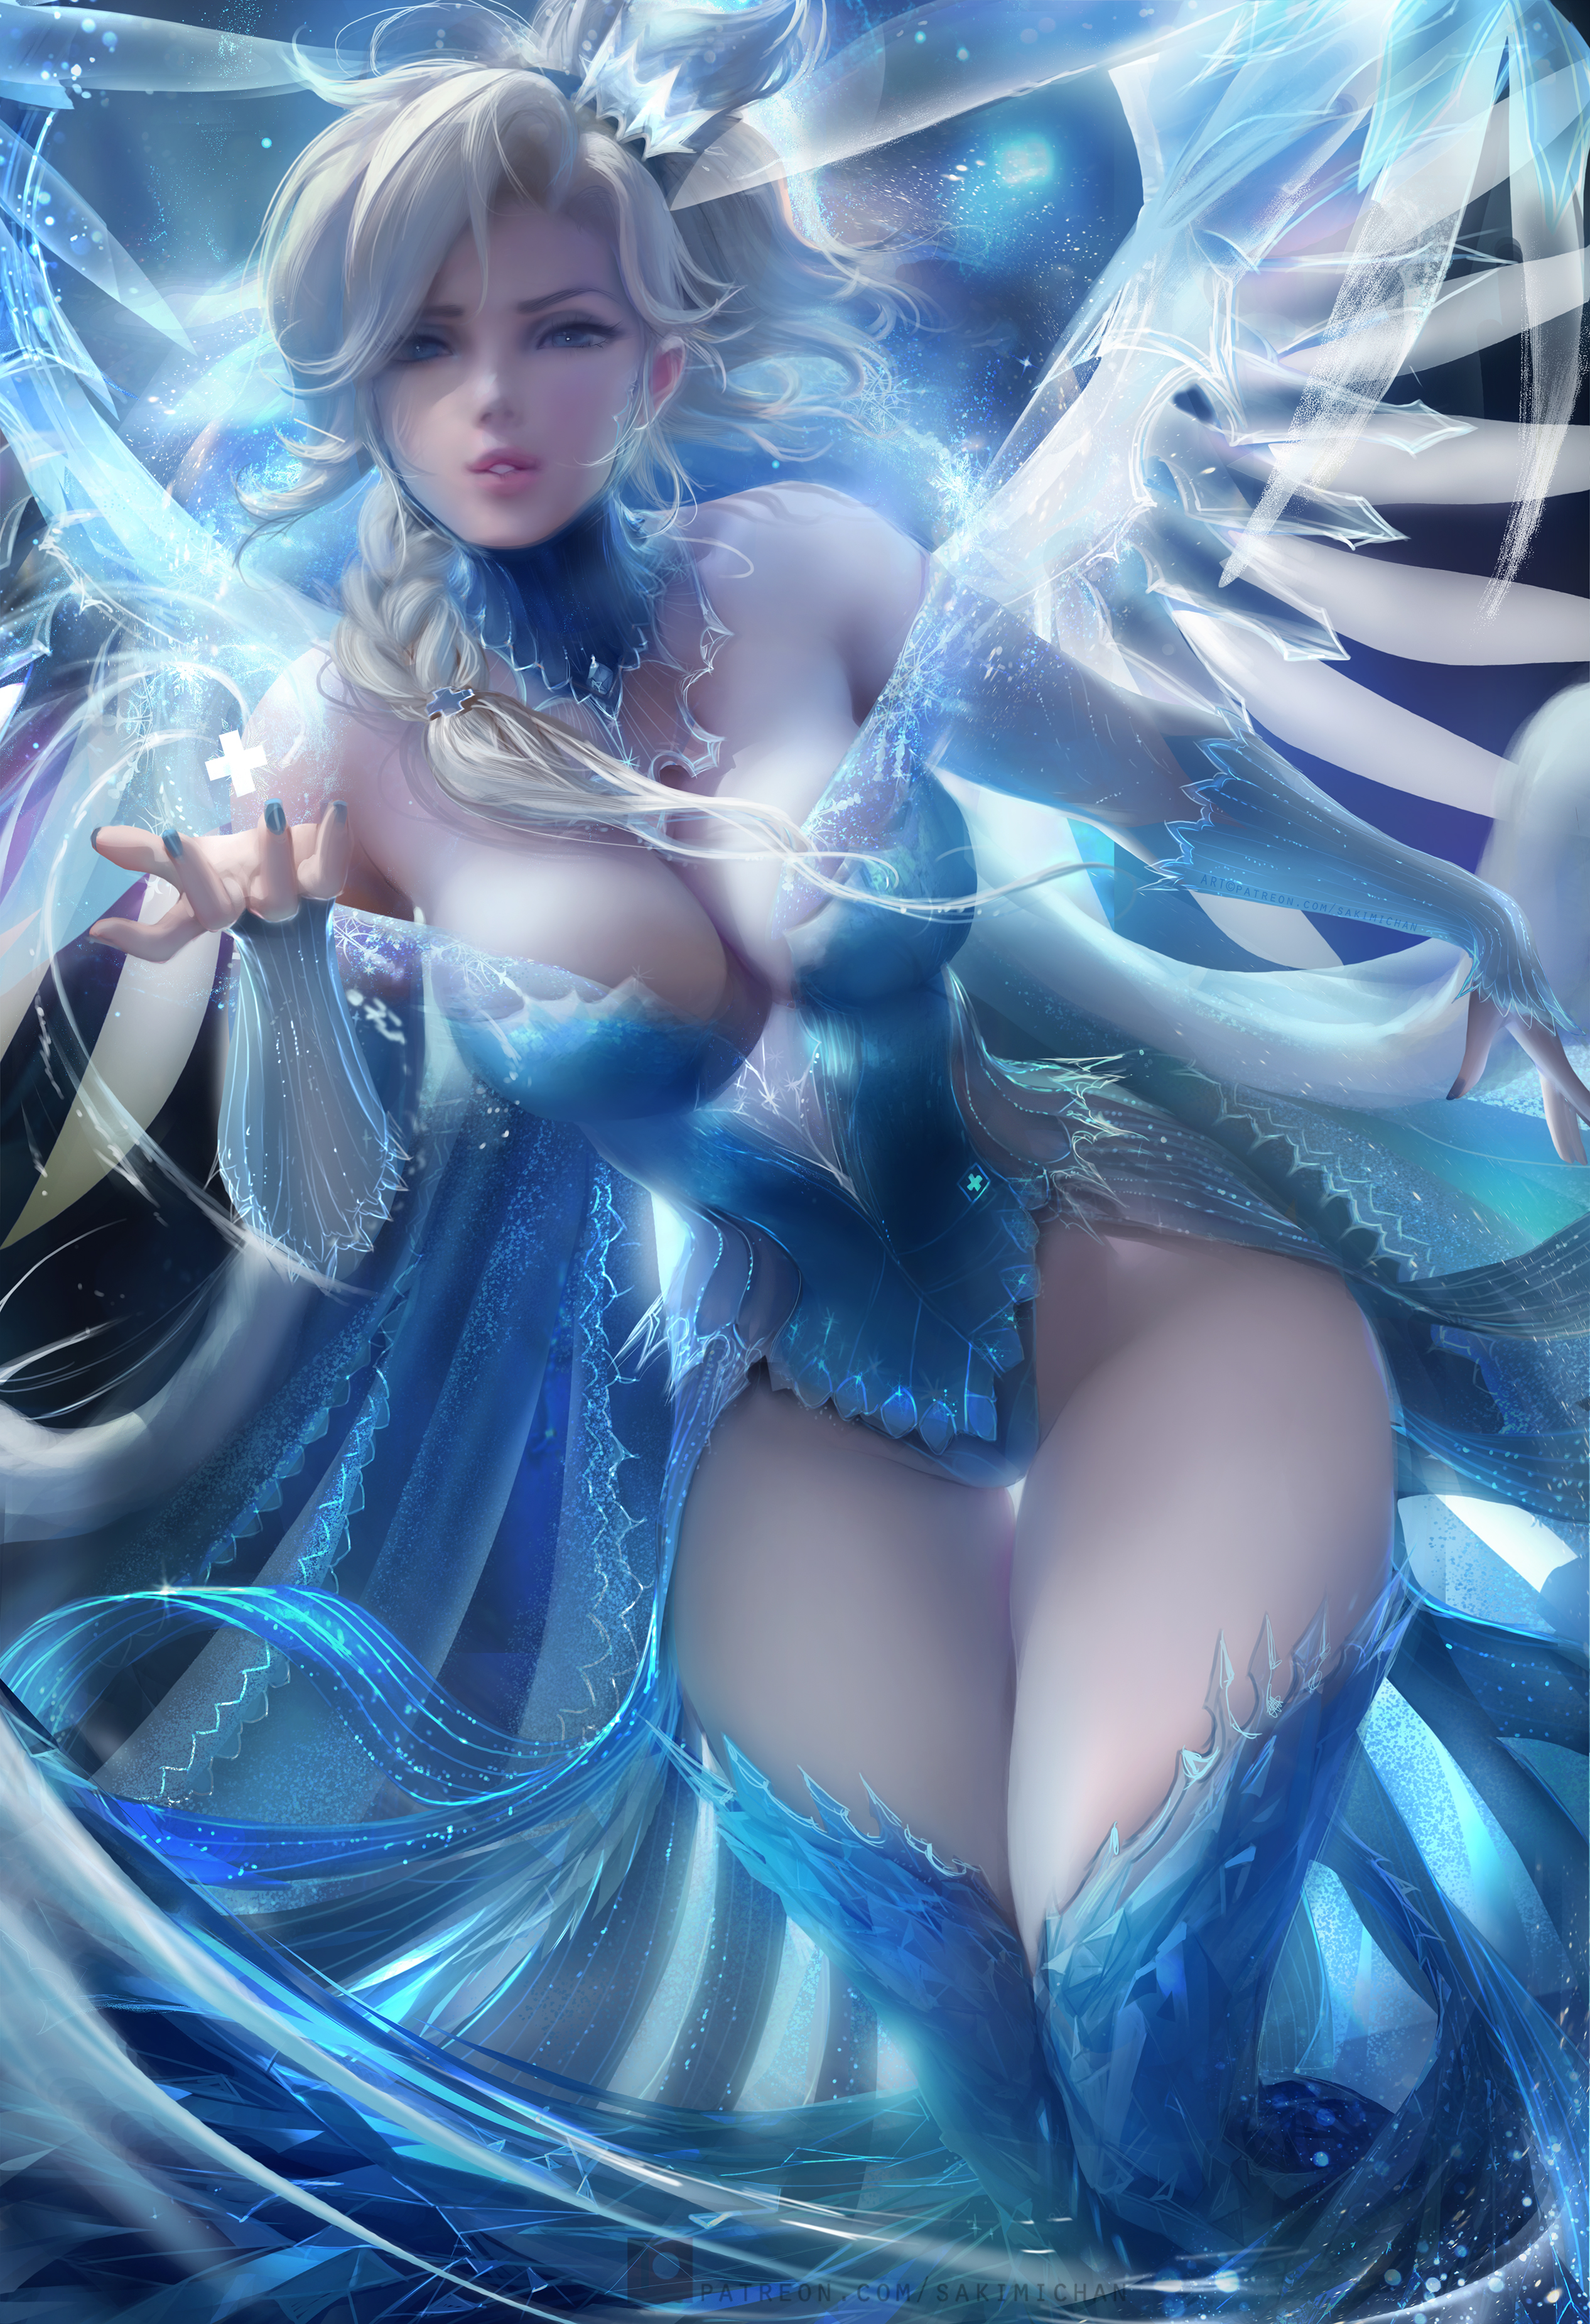 General 2532x3700 Mercy (Overwatch) Overwatch video games video game characters video game girls fantasy girl women braids cleavage bodysuit the gap thigh-highs wings curvy video game art fan art artwork digital art drawing Blizzard Entertainment Sakimichan